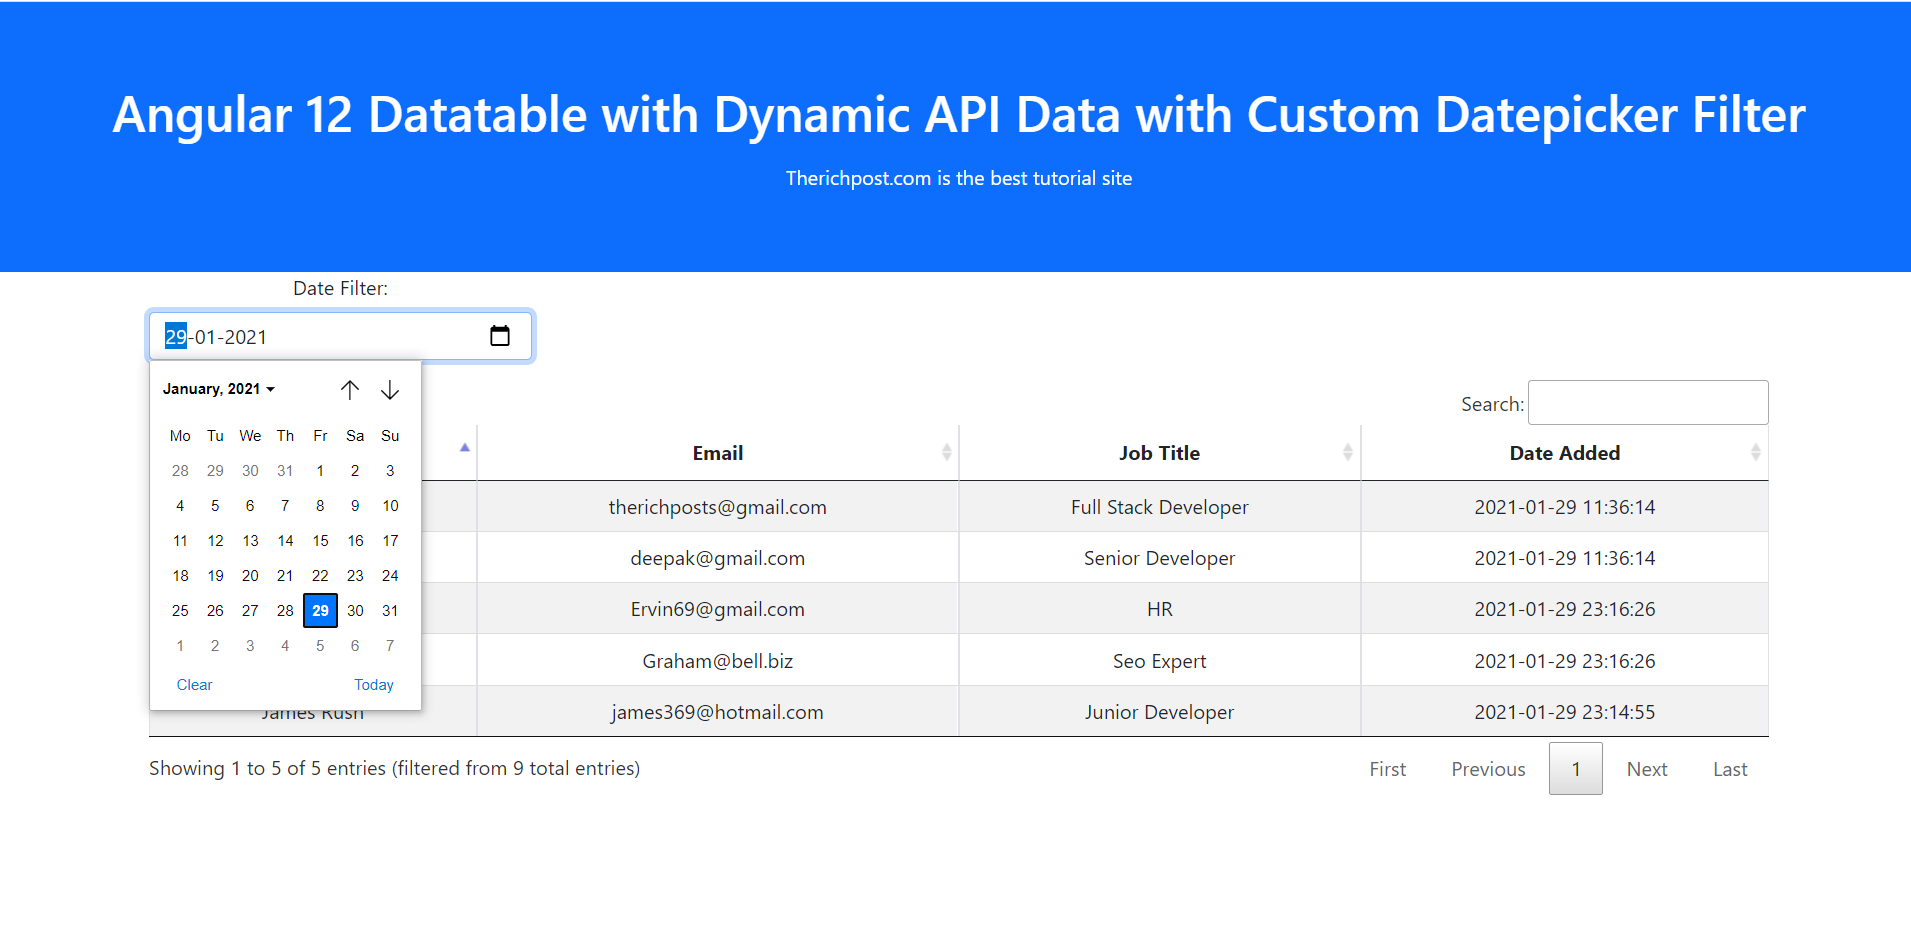 Angular 12 Datatable with Dynamic API Data with Custom Datepicker Filter